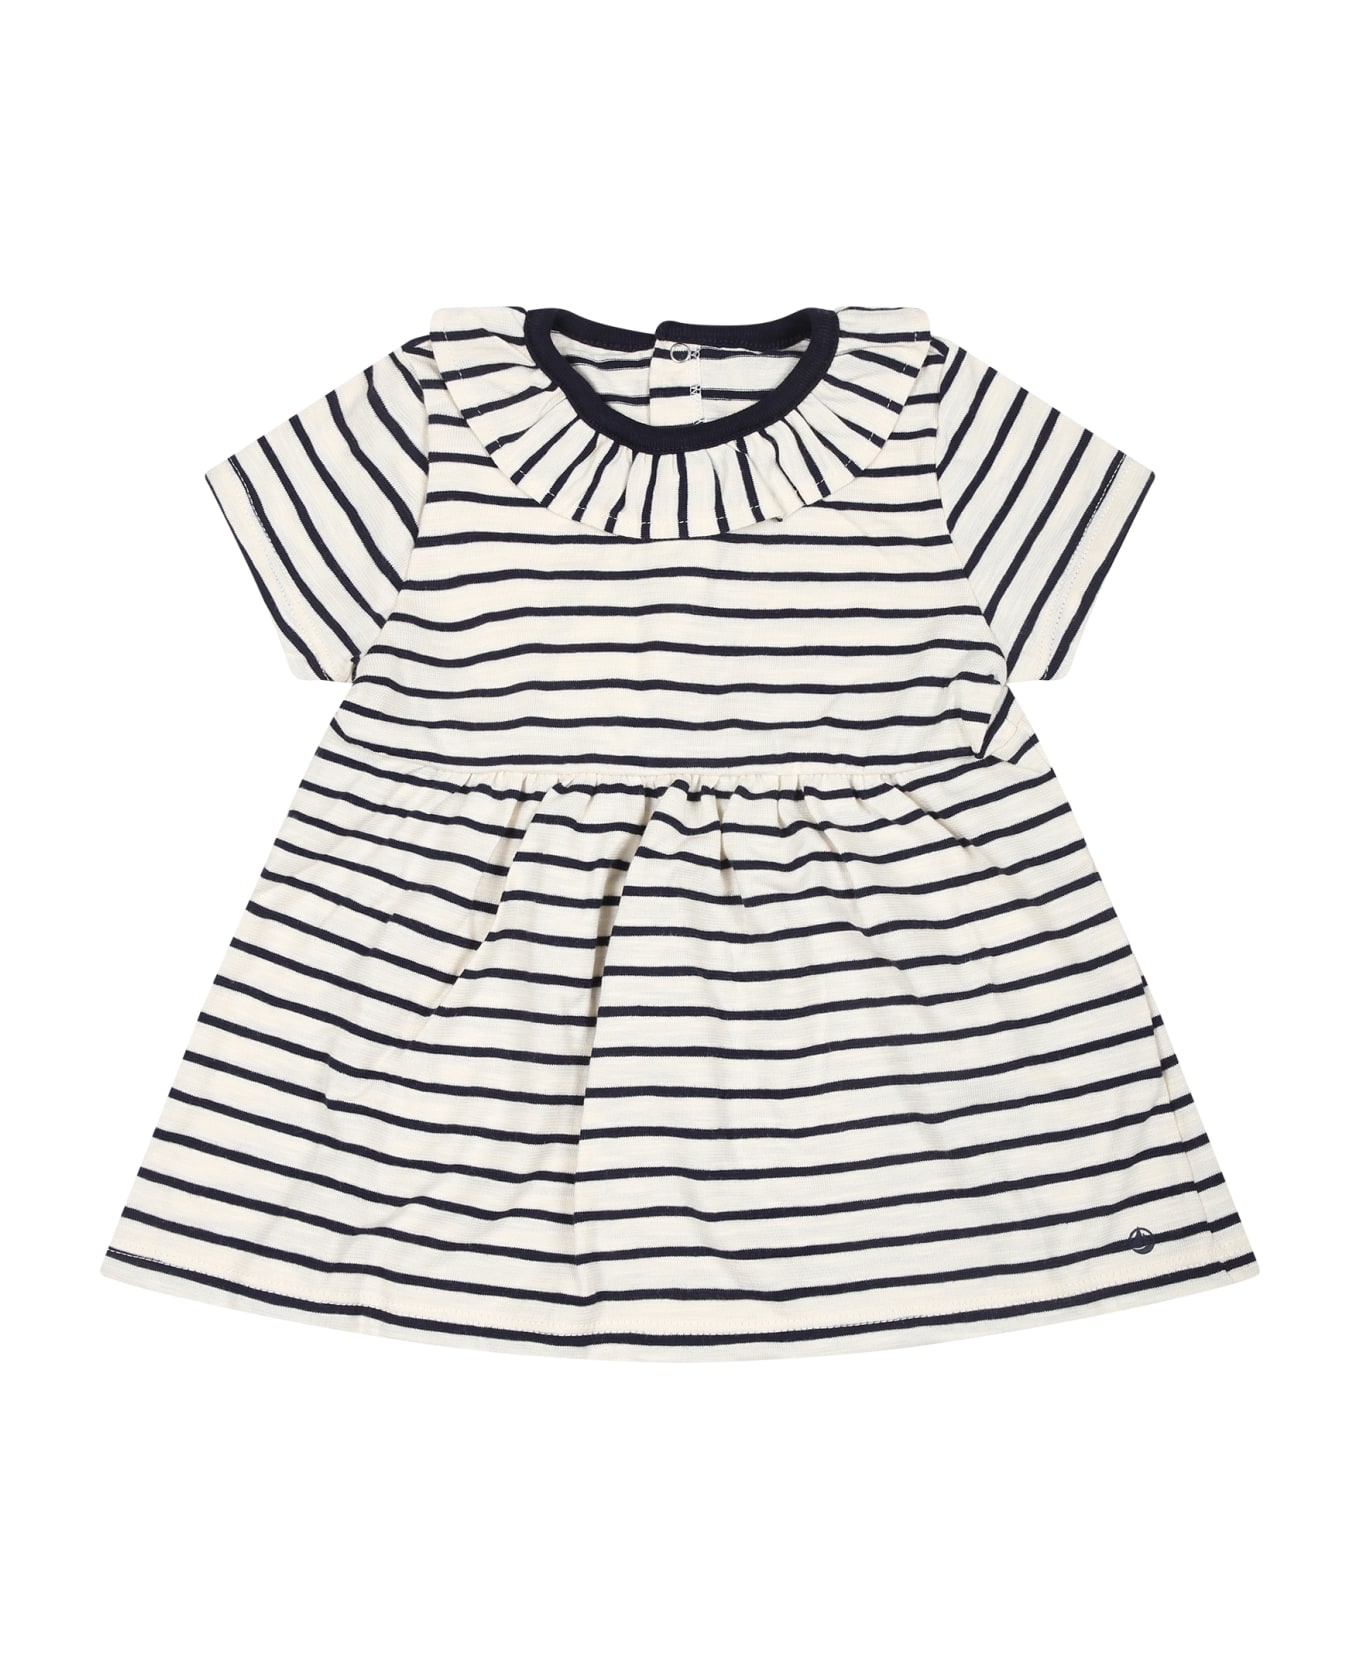 Petit Bateau Ivory Dress For Baby Girl With Blue Stripes - White